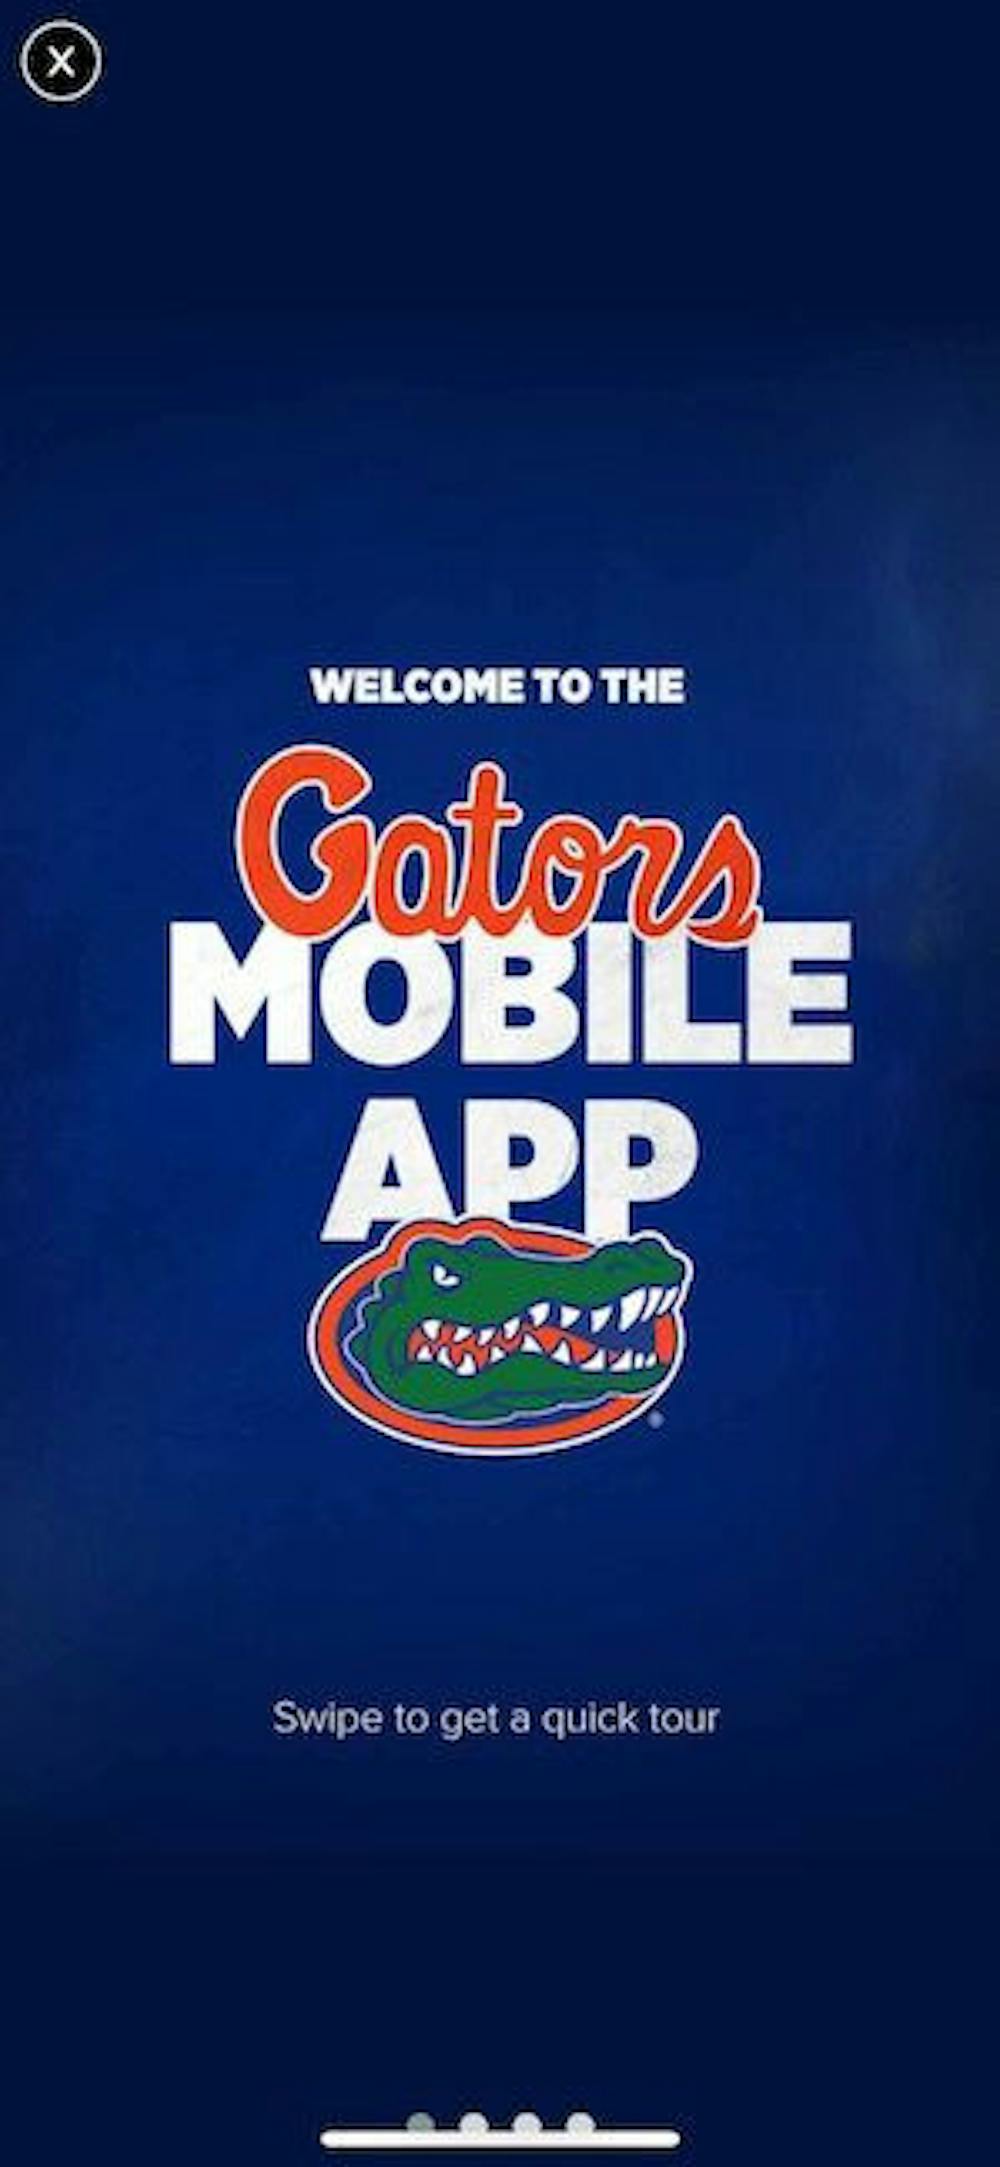 <p><span id="docs-internal-guid-63a26beb-7fff-d953-8a46-e069569c955a"><span>The Florida Gators launched a new app for this year’s student ticketholders. Fans can also use it for other in-game experiences called “Swamp Moments.”</span></span></p>